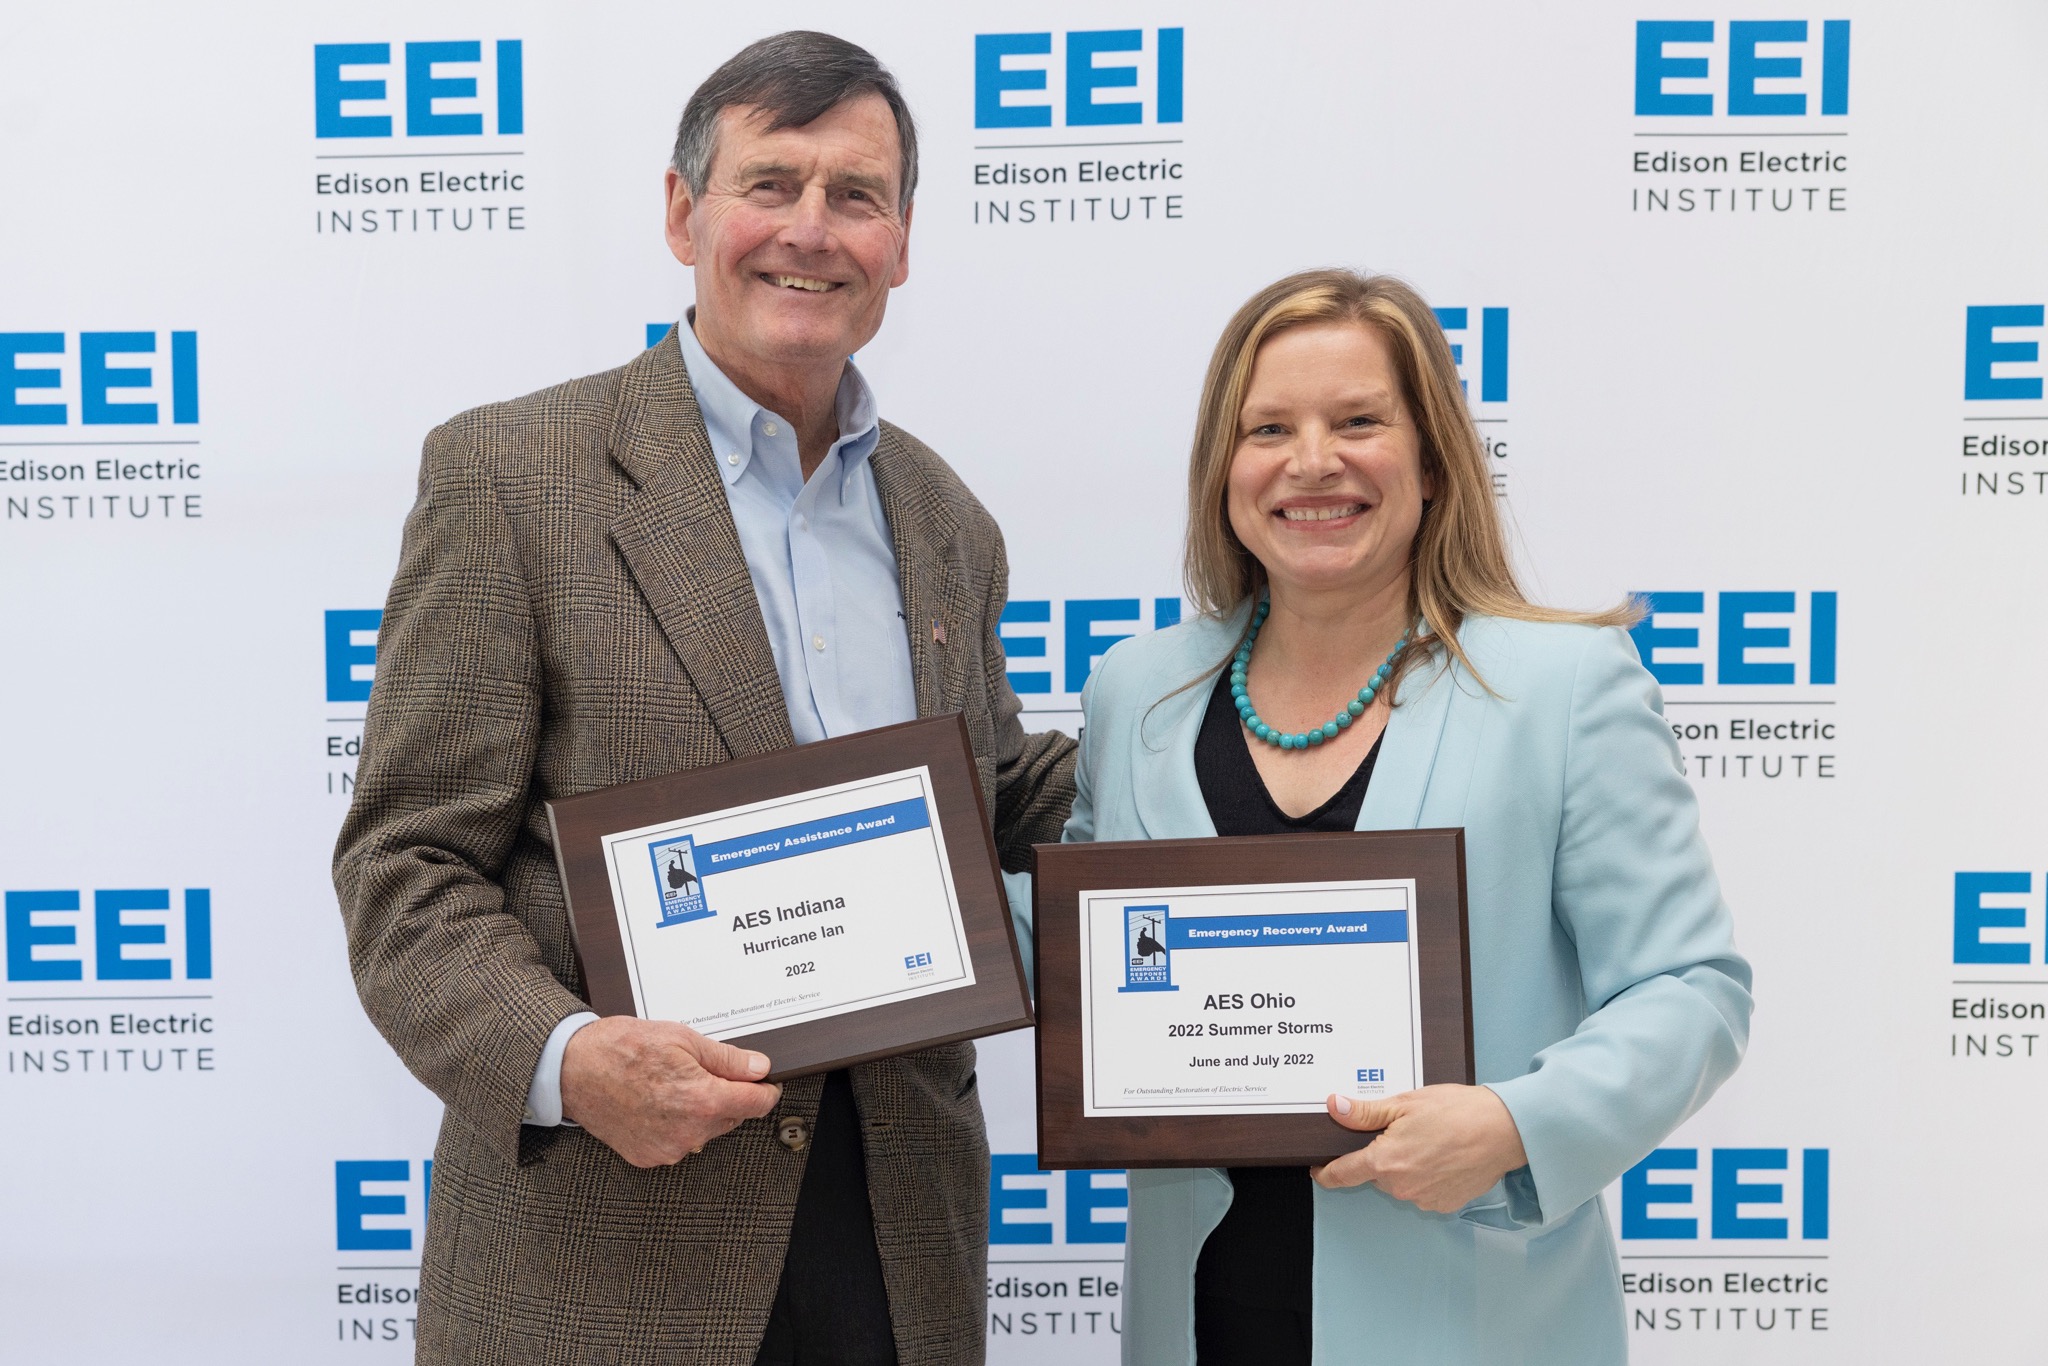 AES US Utilities President &amp; CEO Kristina Lund accepts the Emergency Recovery Award from EEI President Thomas Kuhn